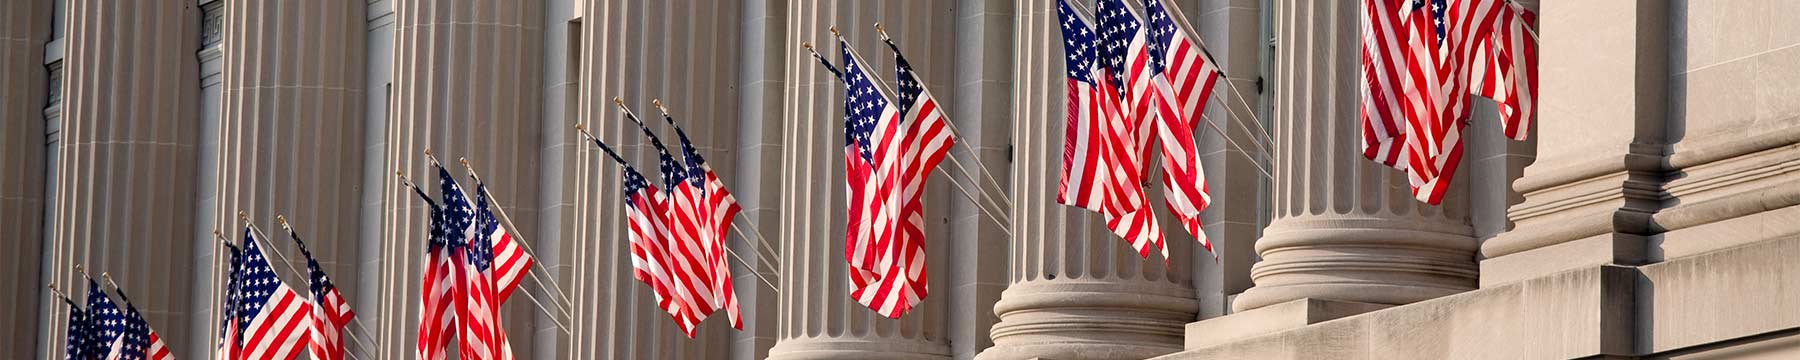 American flags hanging near the columns of the U.S. capitol building.